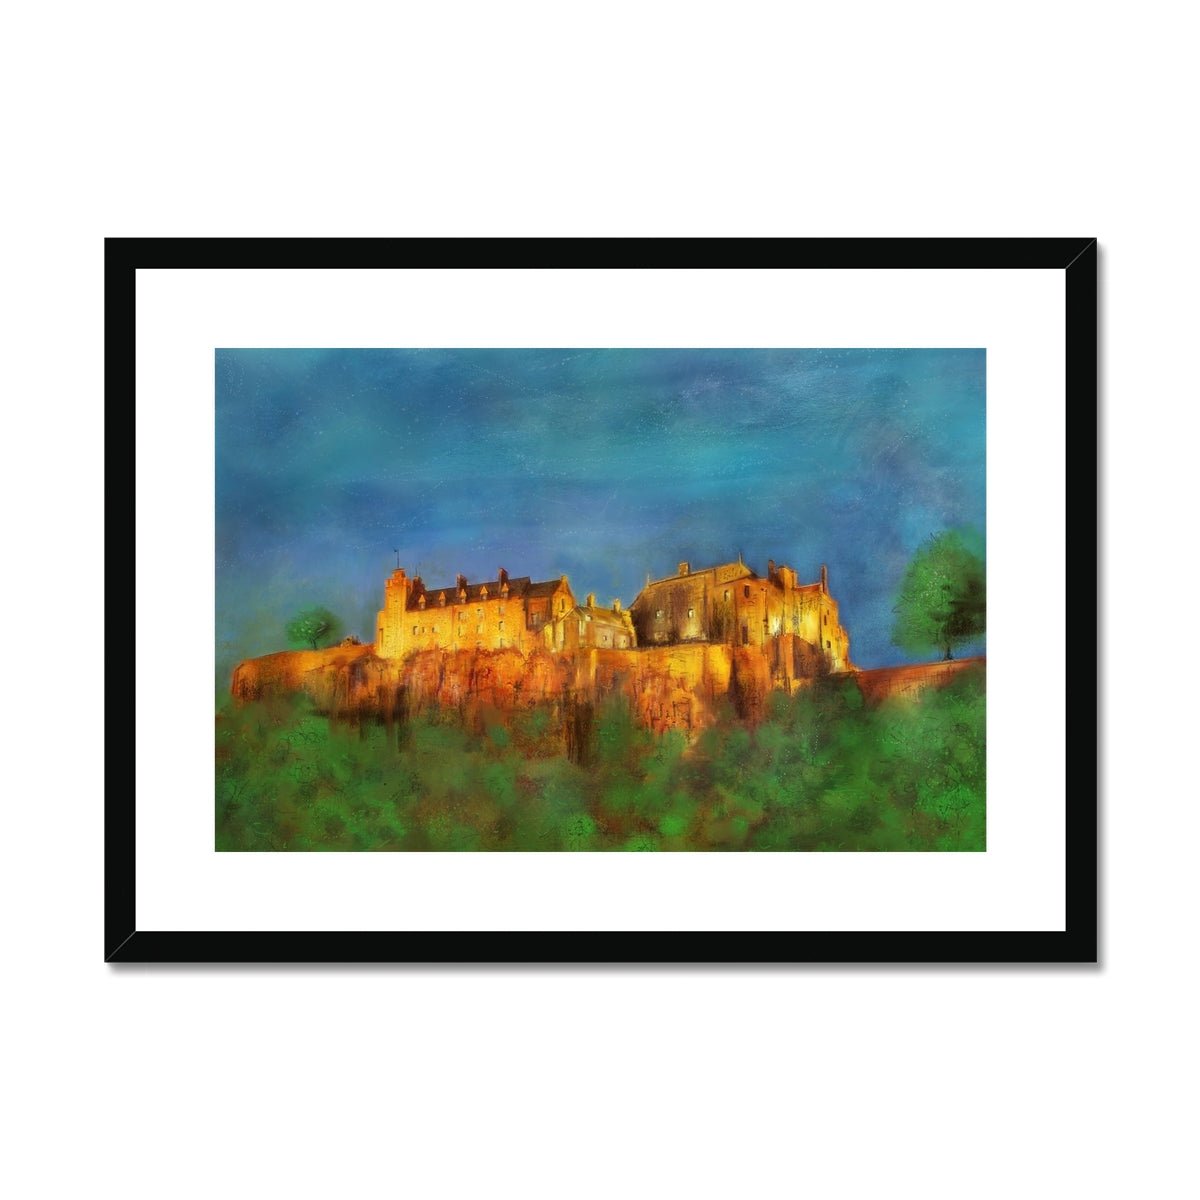 Stirling Castle Painting | Framed & Mounted Prints From Scotland-Framed & Mounted Prints-Historic & Iconic Scotland Art Gallery-A2 Landscape-Black Frame-Paintings, Prints, Homeware, Art Gifts From Scotland By Scottish Artist Kevin Hunter